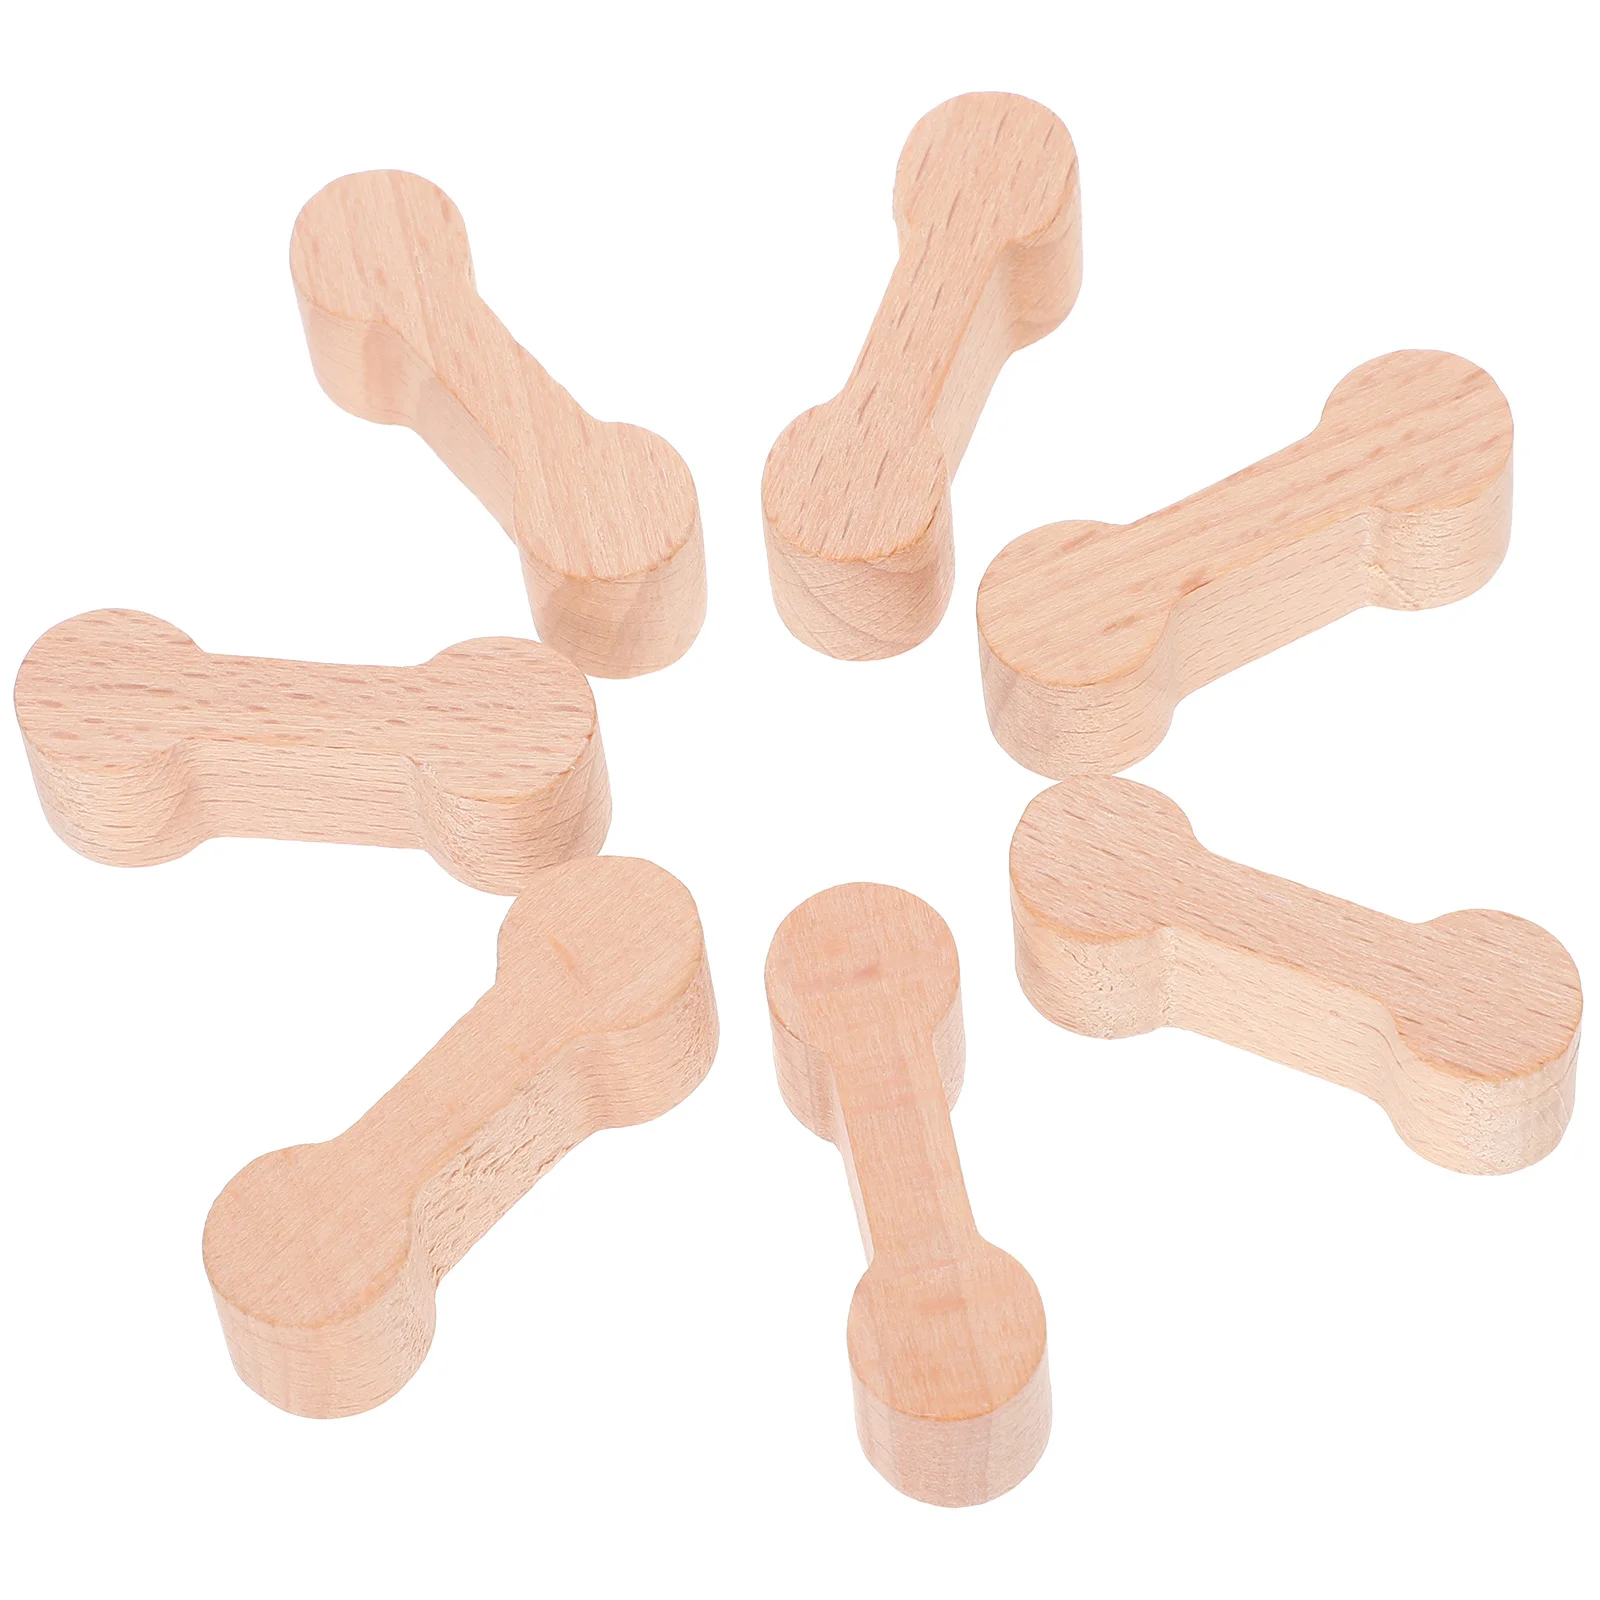 

10 Pcs Train Track Connector Dog Bones Buckle For Games Toy Set Playing Wooden Railway Kids Toddler Decorative Pretend